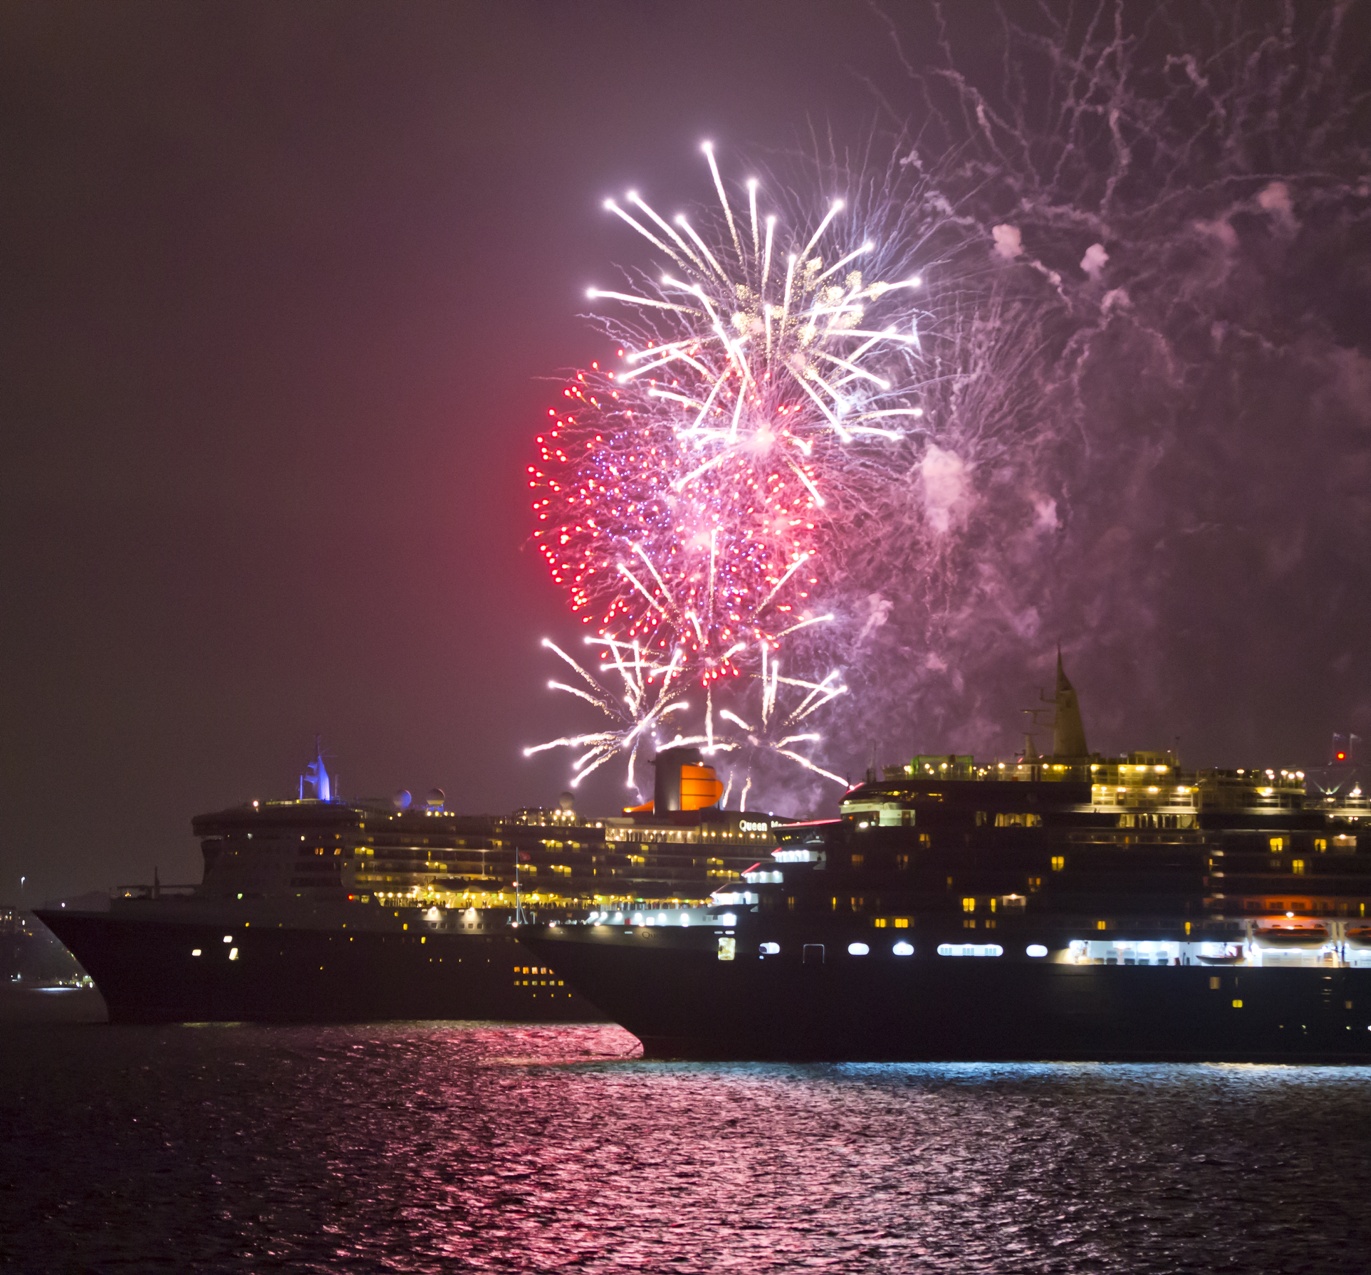 Queen Mary 2 sails by Queen Victoria as fireworks light up Sydneys sky March 12 2015 Photo by James Morgan 1